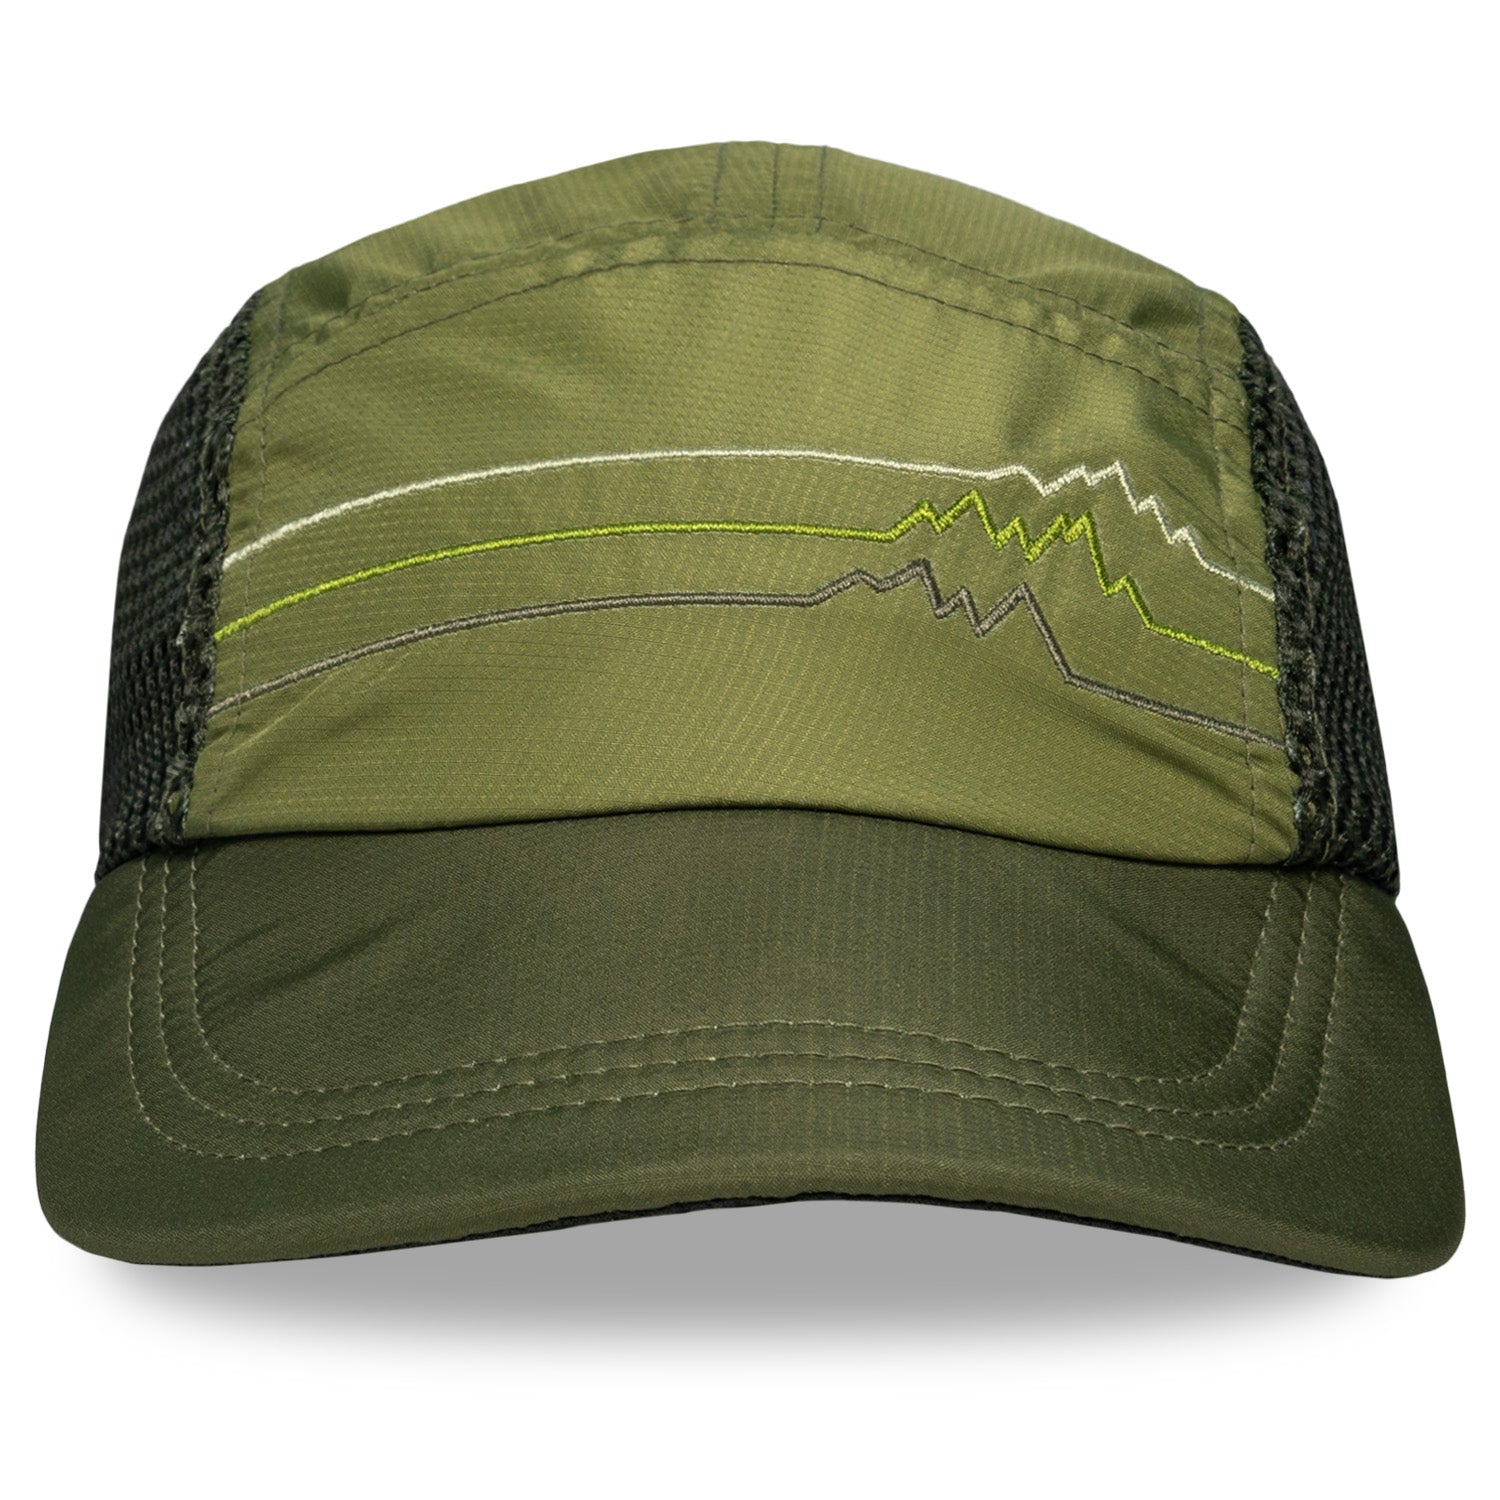 7707-310_CRUSHERHAT_MOUNTAINSOLIVE_DSC00134.FRONT.jpg